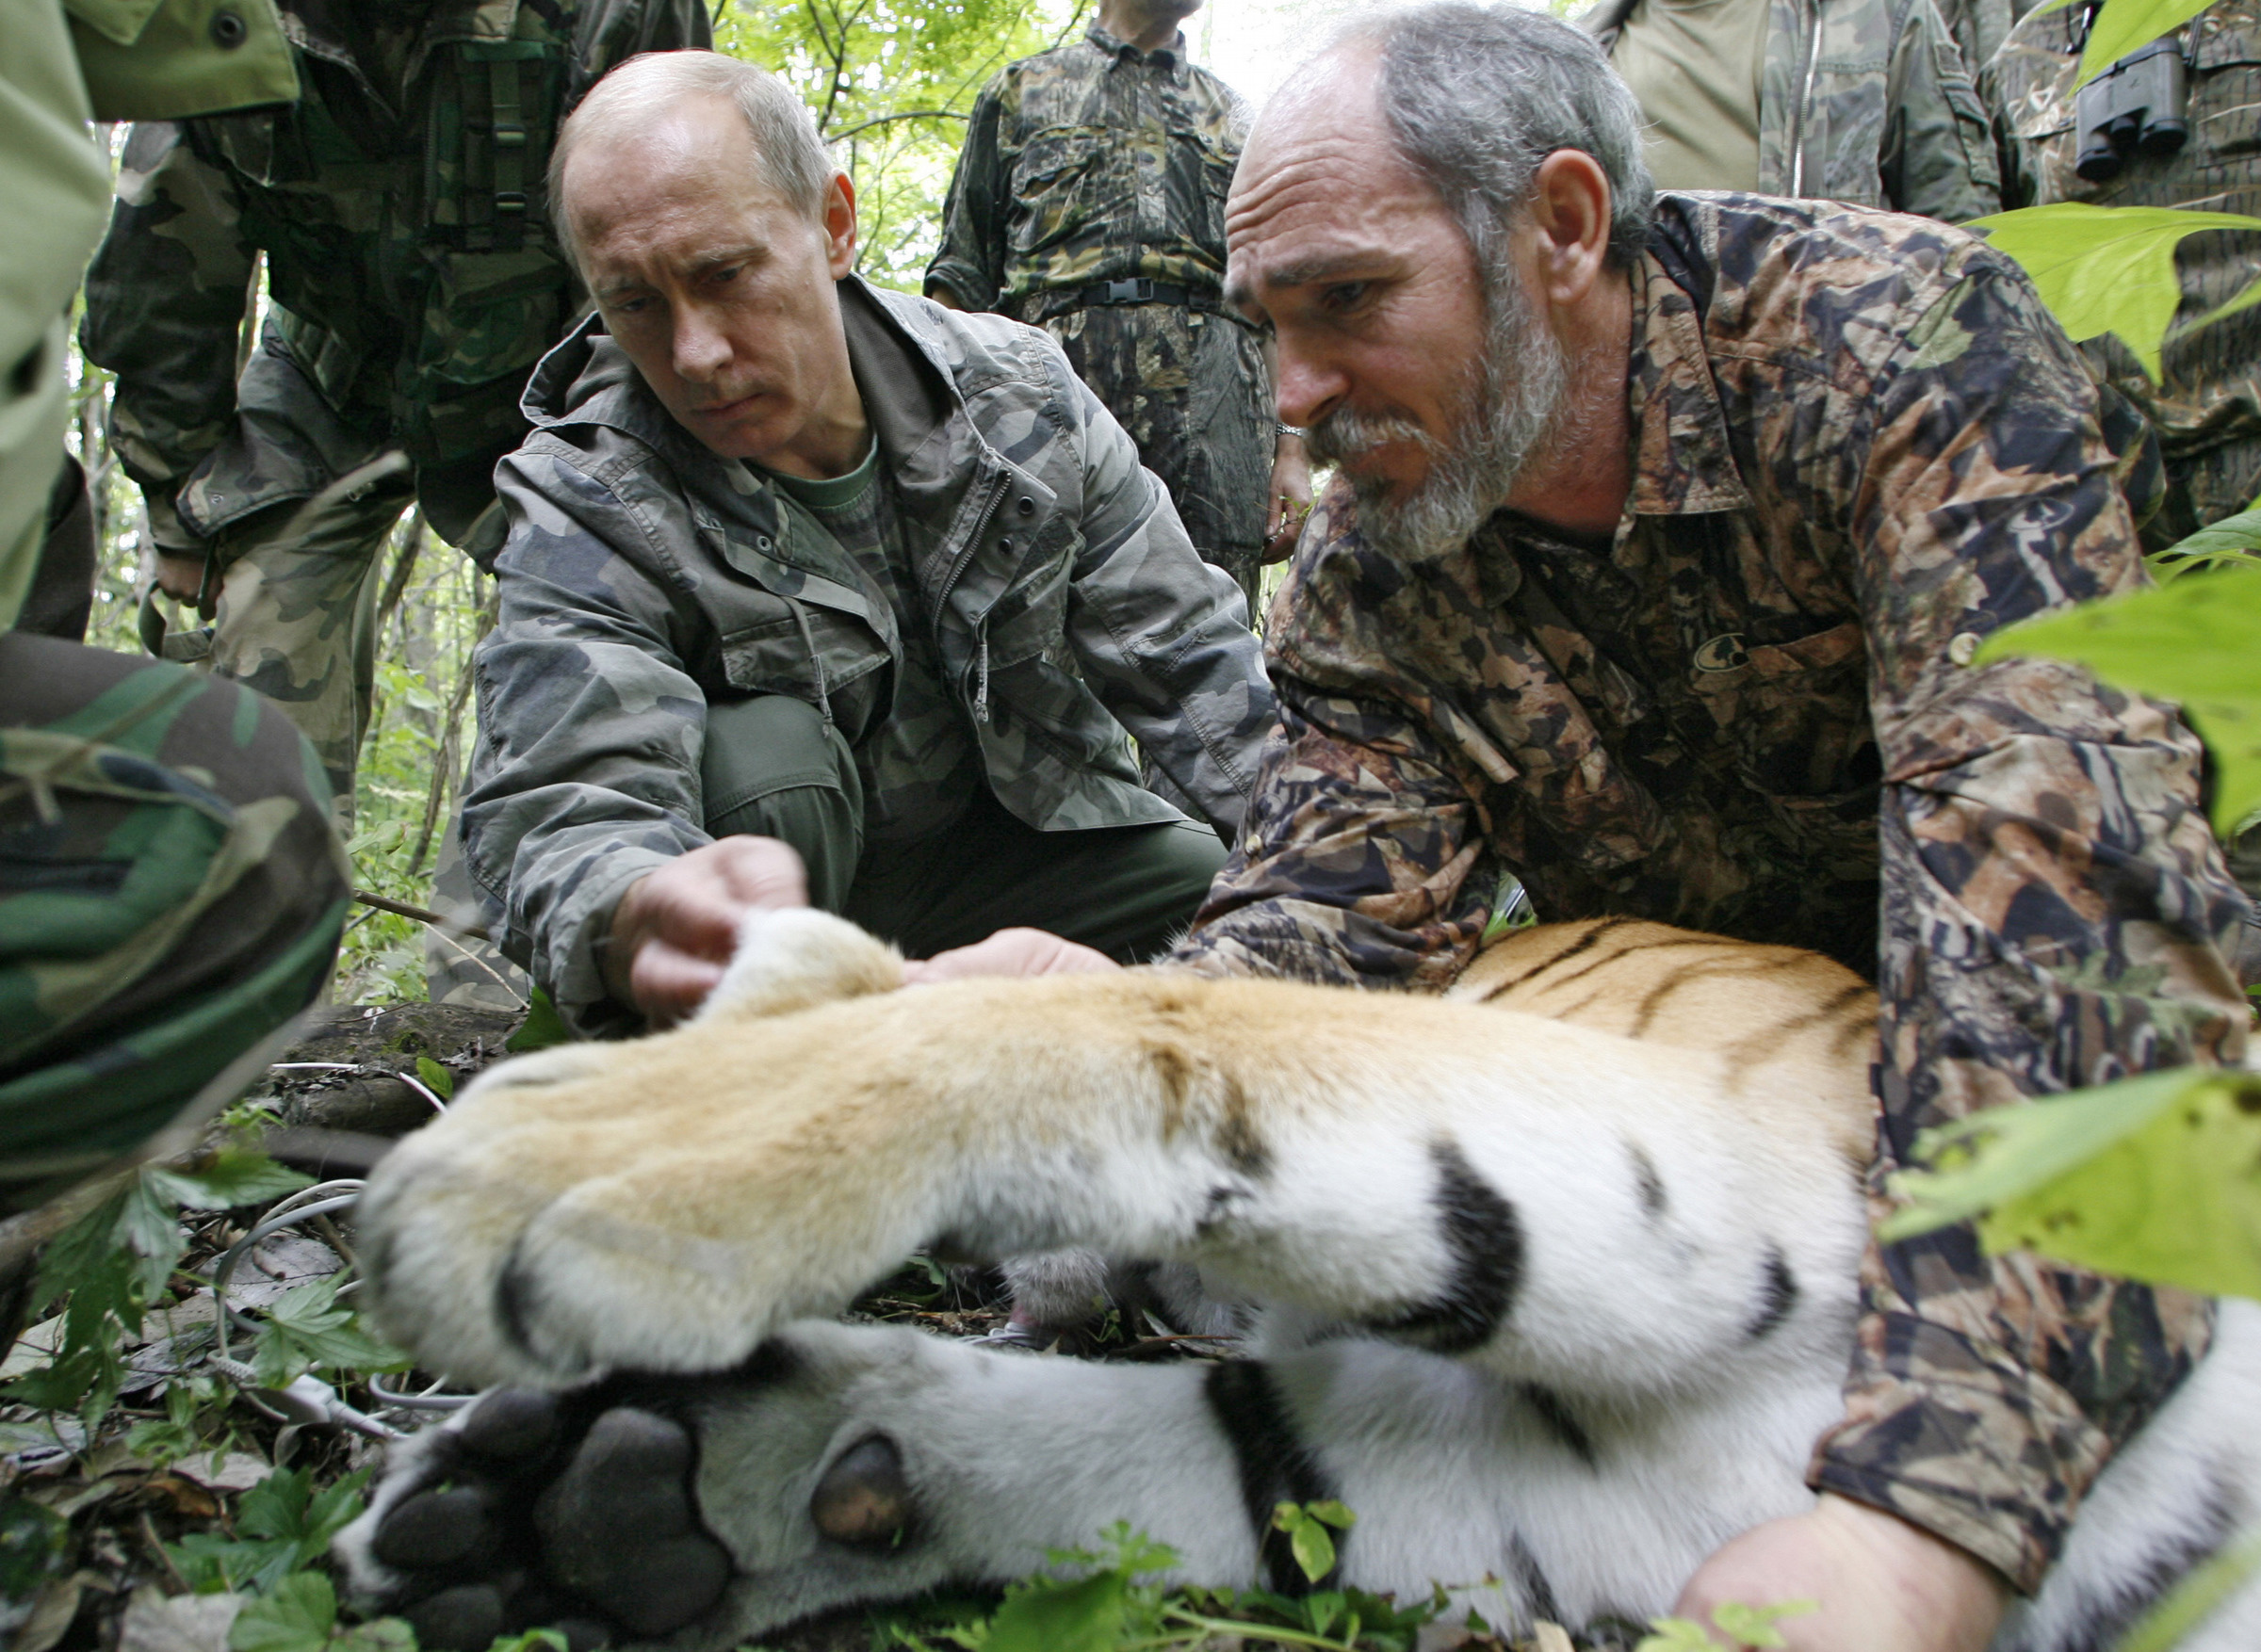 Prime Minister Vladimir Putin, left, looks at the tranquilized five-year-old Ussuri tiger as researchers put a collar with a satellite tracker on the animal in a Russian Academy of Sciences reserve in Russia's Far East on Aug. 31, 2008.